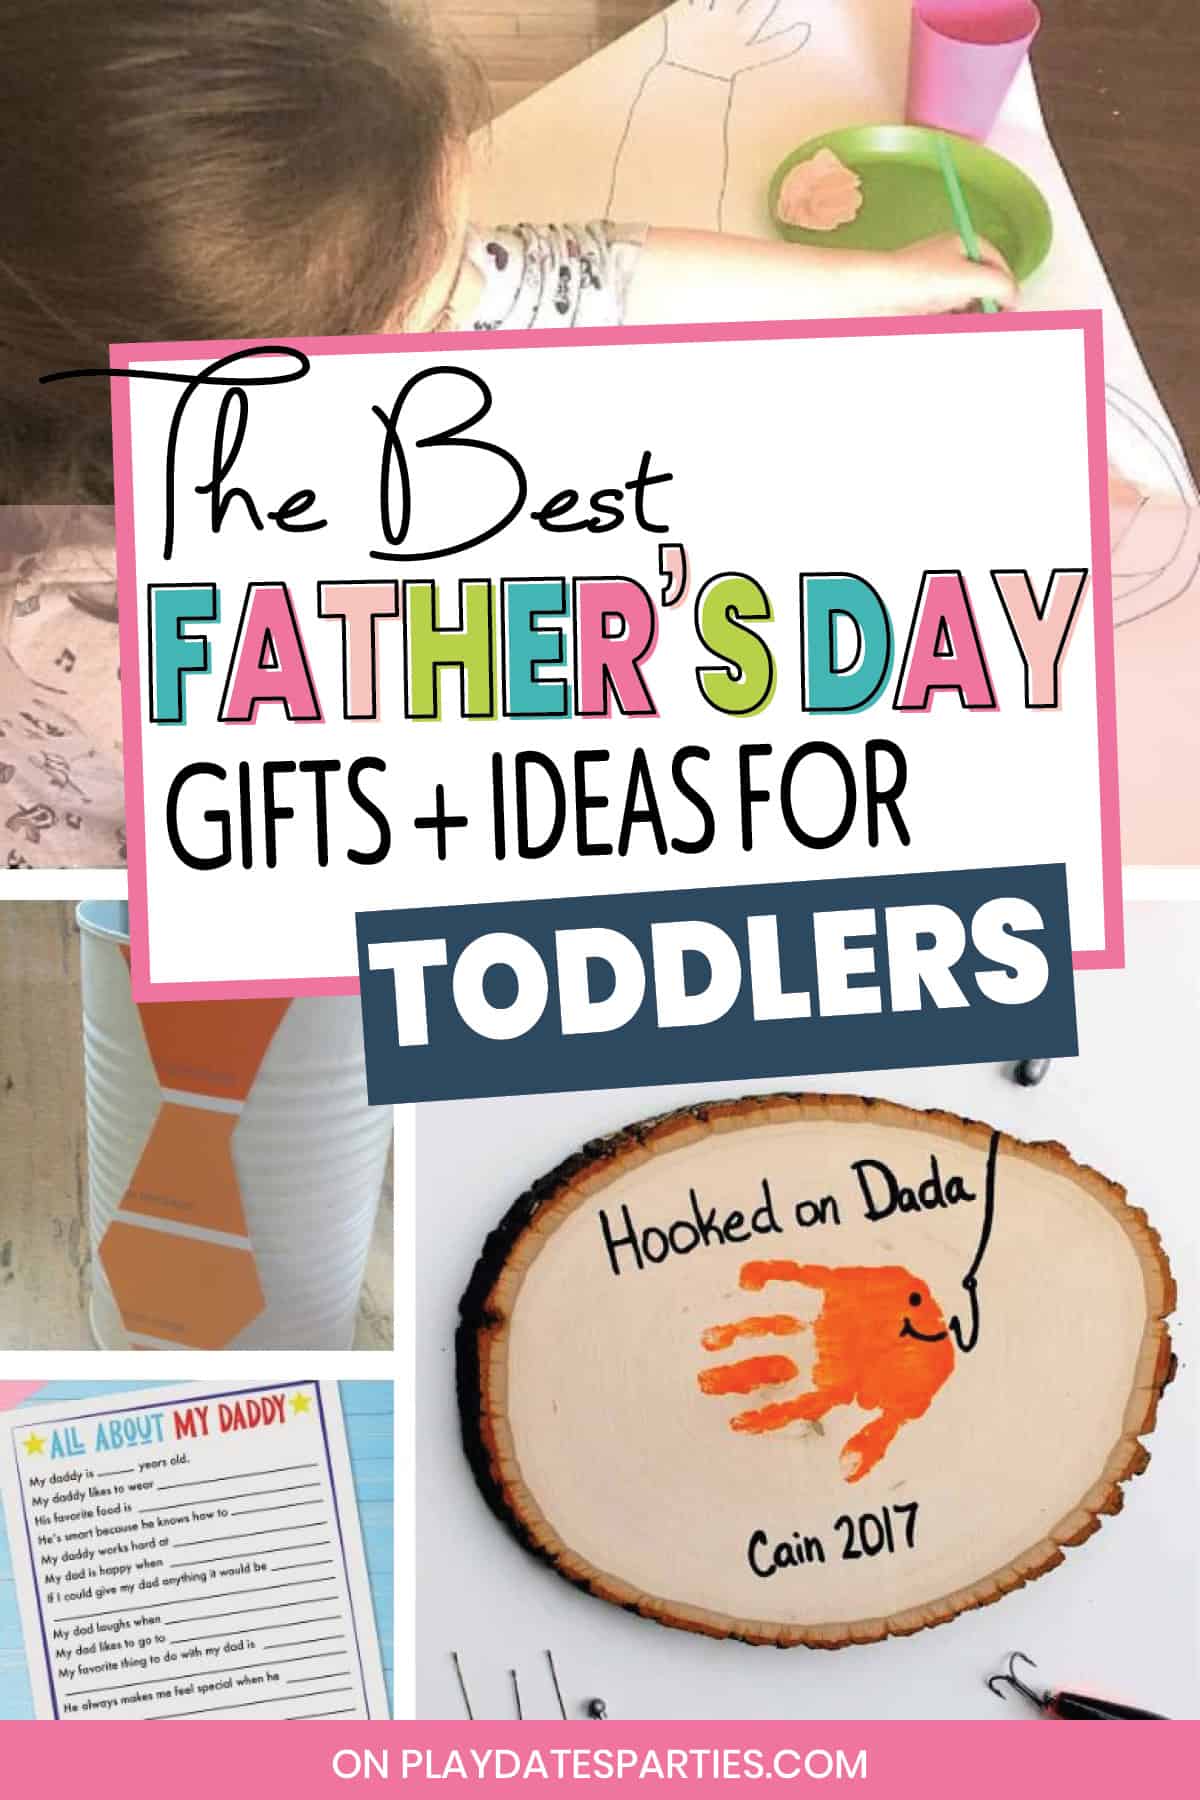 DIY Father's Day Gift Ideas - The Scrap Shoppe